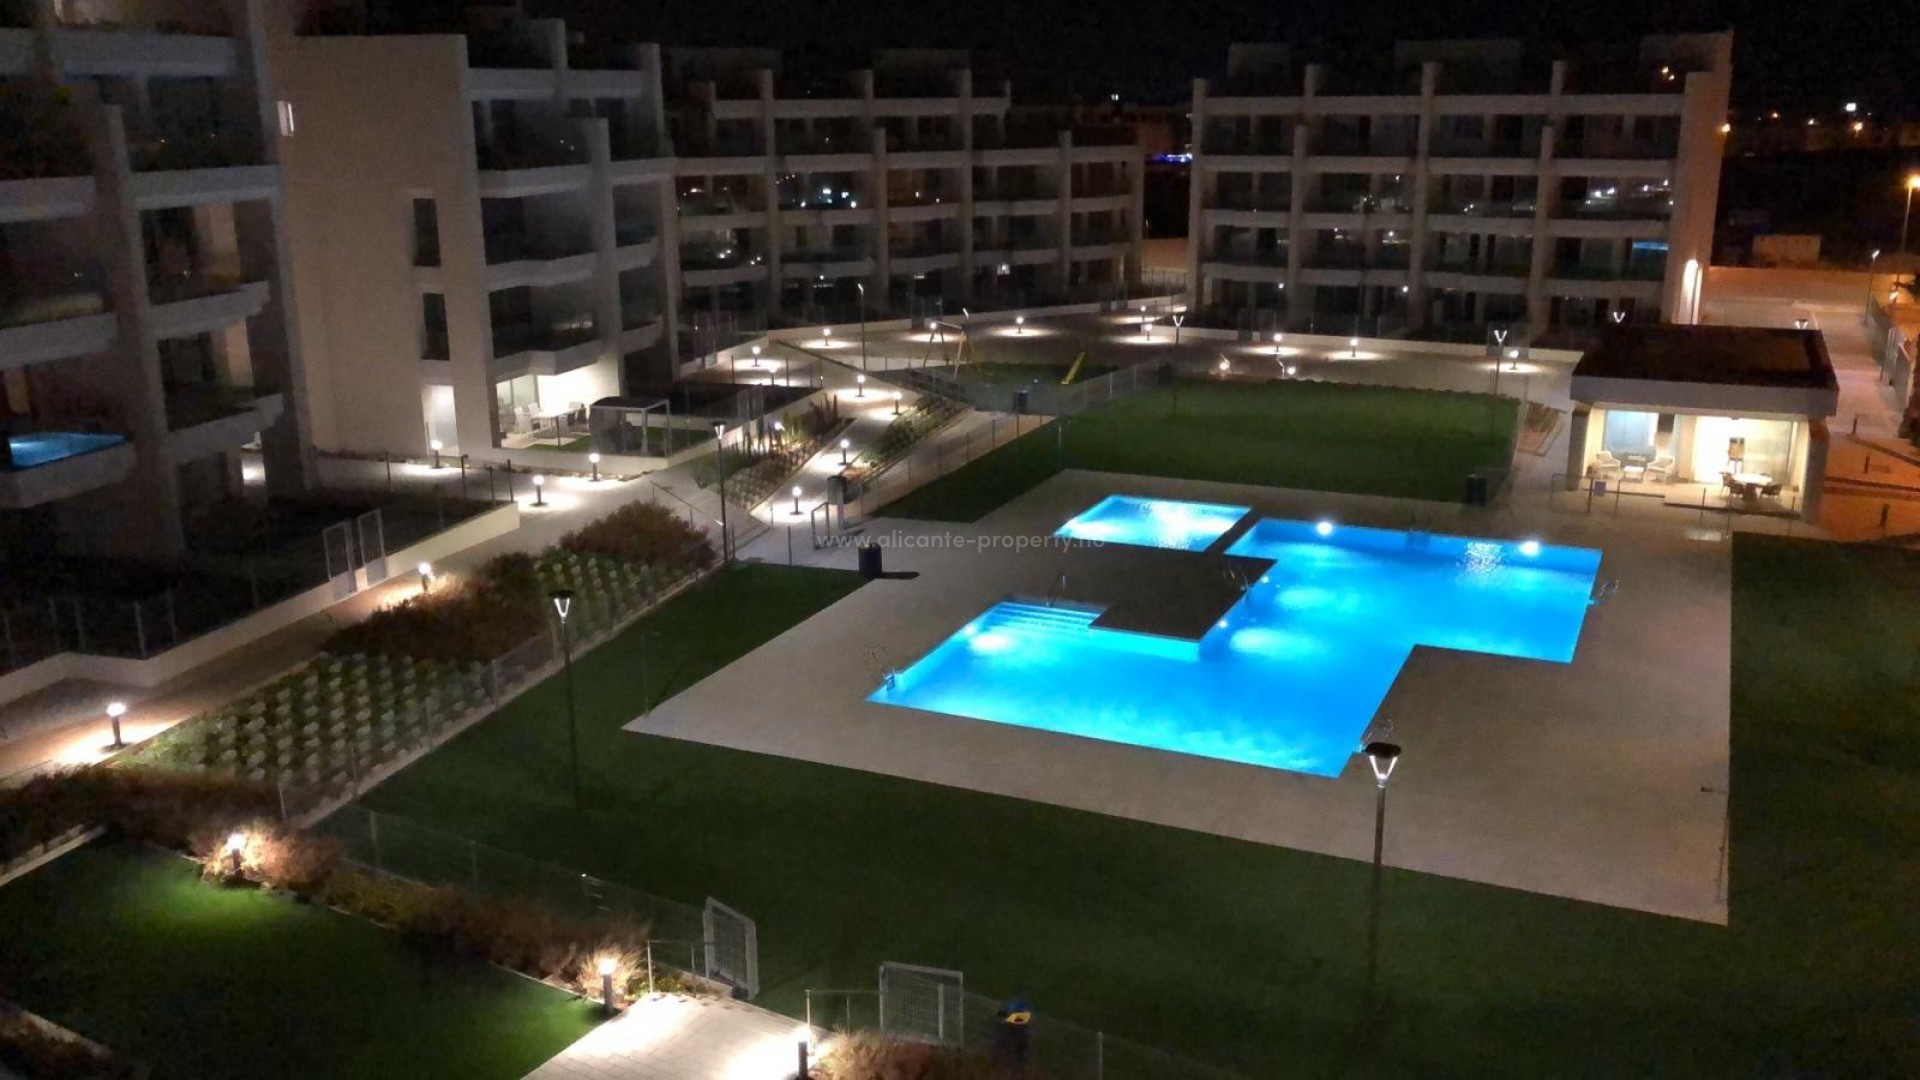 New built residential complex in Vallamartin, flats/penthouse 2 bedrooms, 2 bathrooms, garden or sunny roof terrace with fantastic views, shared pool